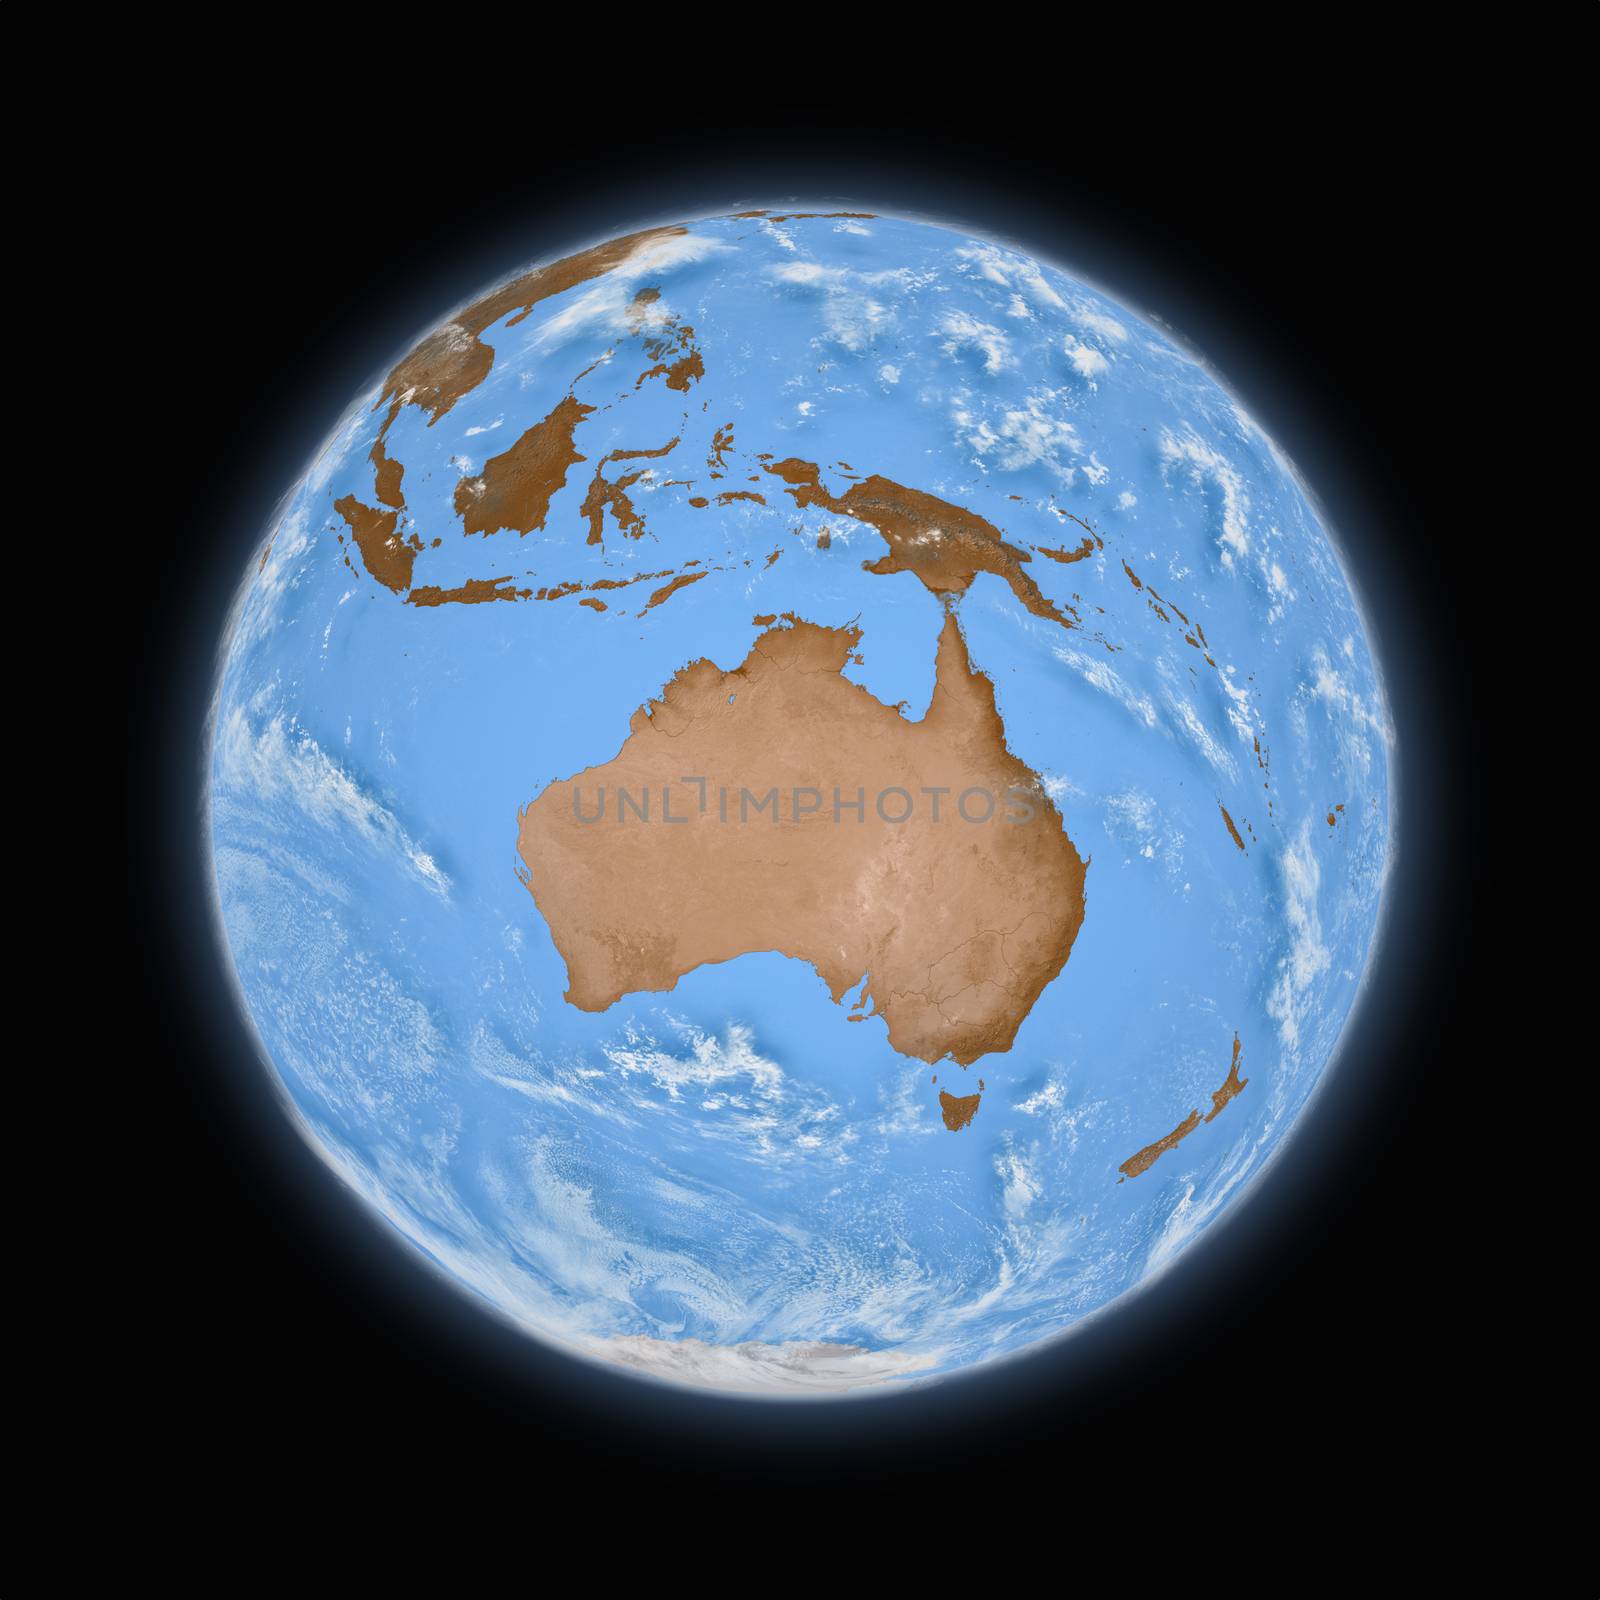 Australia on planet Earth by Harvepino